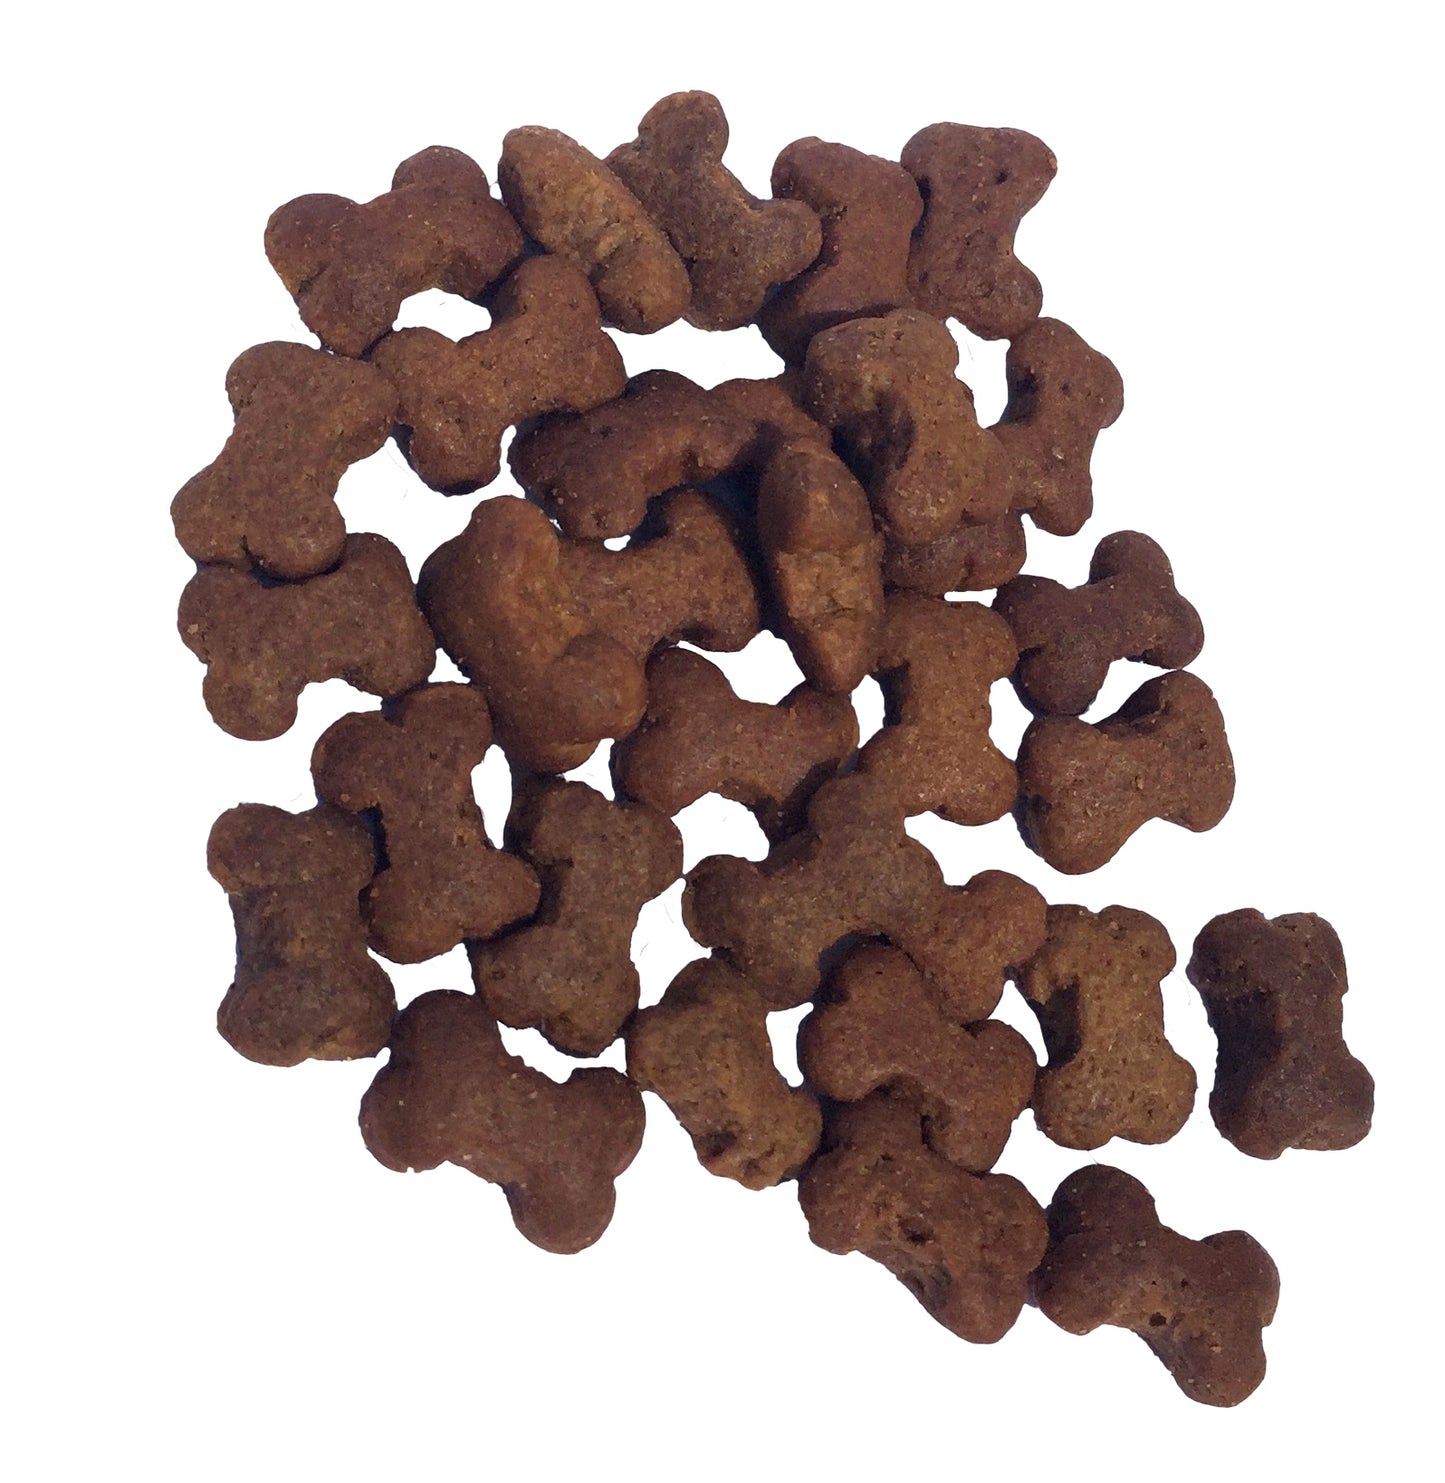 80% POULTRY Training Treats 15kg Product code: SK-00455